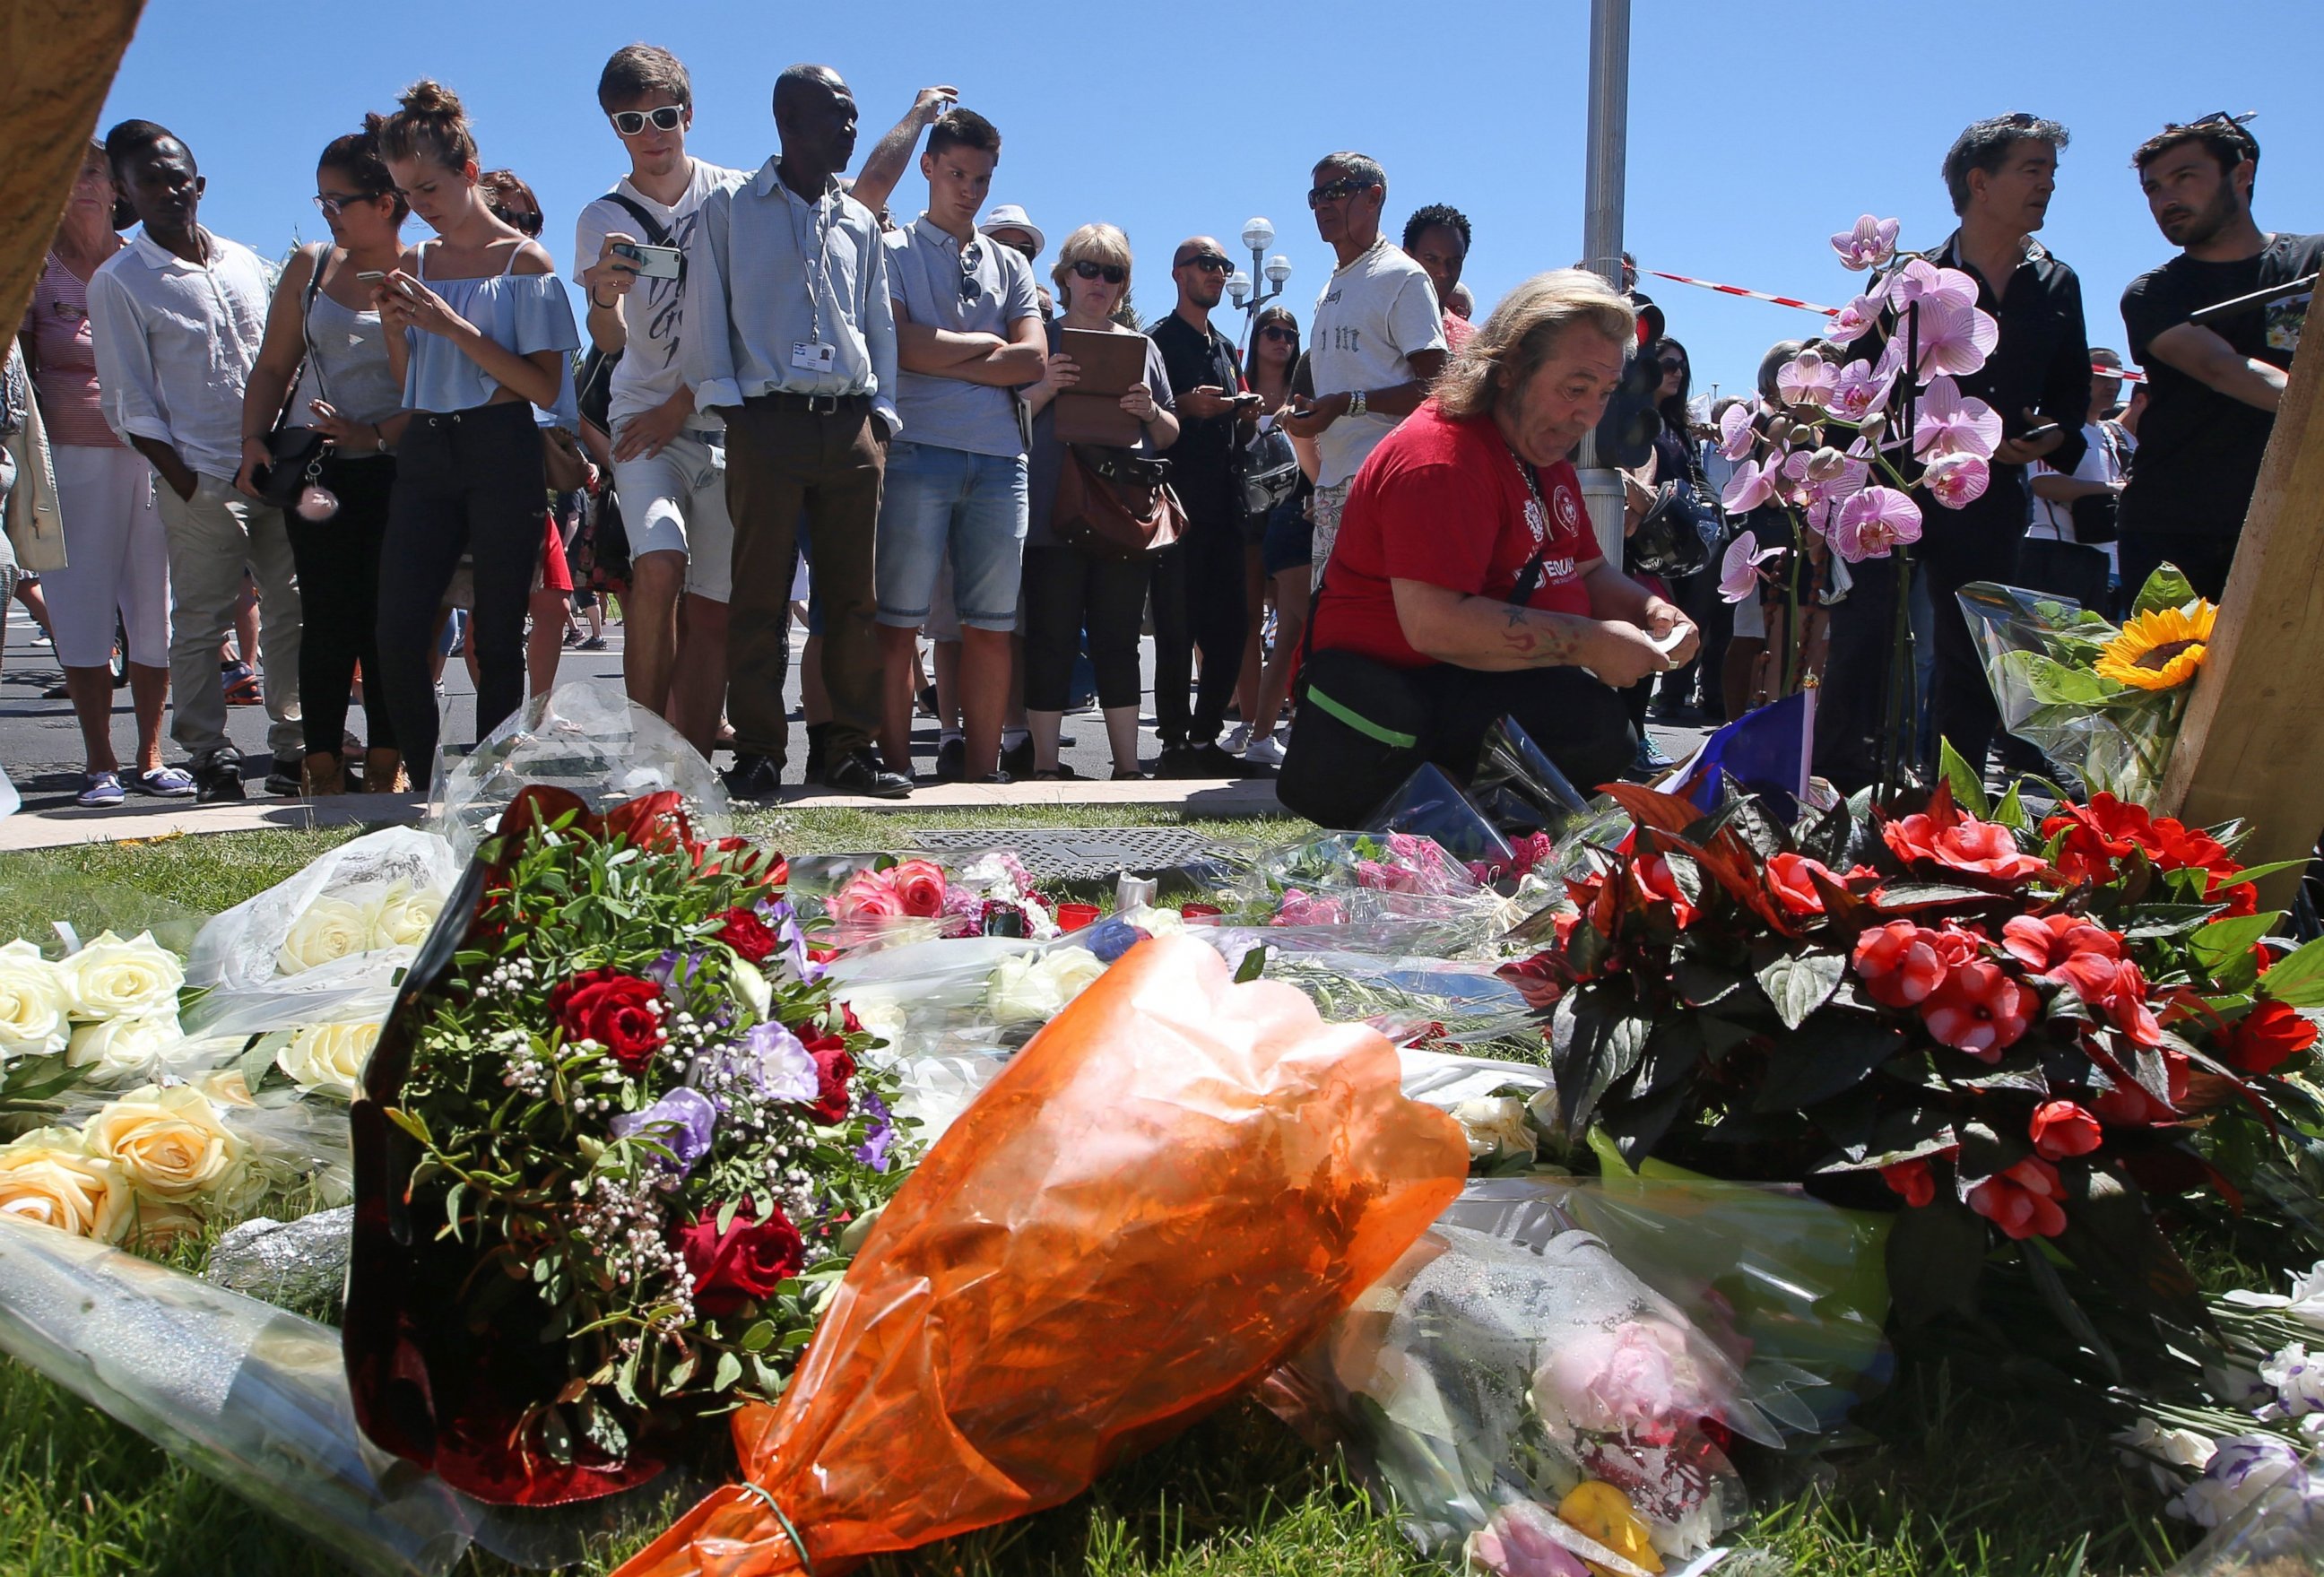 PHOTO: Floral tributes are laid out near the site of the truck attack in the French resort city of Nice, France, July 15, 2016.